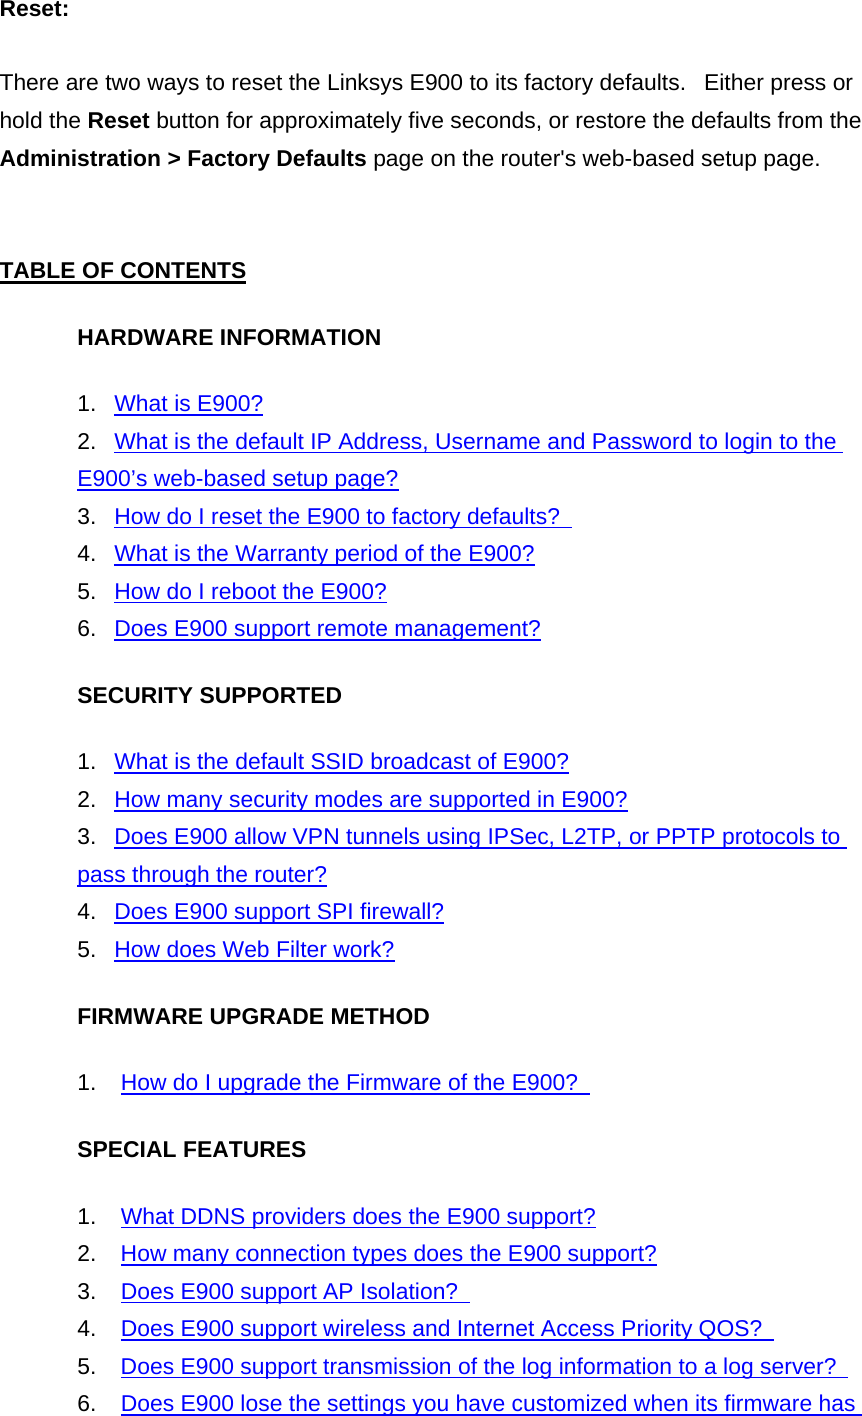 Reset:  There are two ways to reset the Linksys E900 to its factory defaults.   Either press or hold the Reset button for approximately five seconds, or restore the defaults from the Administration &gt; Factory Defaults page on the router&apos;s web-based setup page.   TABLE OF CONTENTS HARDWARE INFORMATION 1.   What is E900? 2.   What is the default IP Address, Username and Password to login to the E900’s web-based setup page? 3.   How do I reset the E900 to factory defaults?   4.   What is the Warranty period of the E900? 5.   How do I reboot the E900? 6.   Does E900 support remote management? SECURITY SUPPORTED 1.   What is the default SSID broadcast of E900? 2.   How many security modes are supported in E900? 3.   Does E900 allow VPN tunnels using IPSec, L2TP, or PPTP protocols to pass through the router? 4.   Does E900 support SPI firewall? 5.   How does Web Filter work? FIRMWARE UPGRADE METHOD 1.    How do I upgrade the Firmware of the E900?   SPECIAL FEATURES 1.    What DDNS providers does the E900 support? 2.    How many connection types does the E900 support? 3.    Does E900 support AP Isolation?   4.    Does E900 support wireless and Internet Access Priority QOS?   5.    Does E900 support transmission of the log information to a log server?   6.    Does E900 lose the settings you have customized when its firmware has 